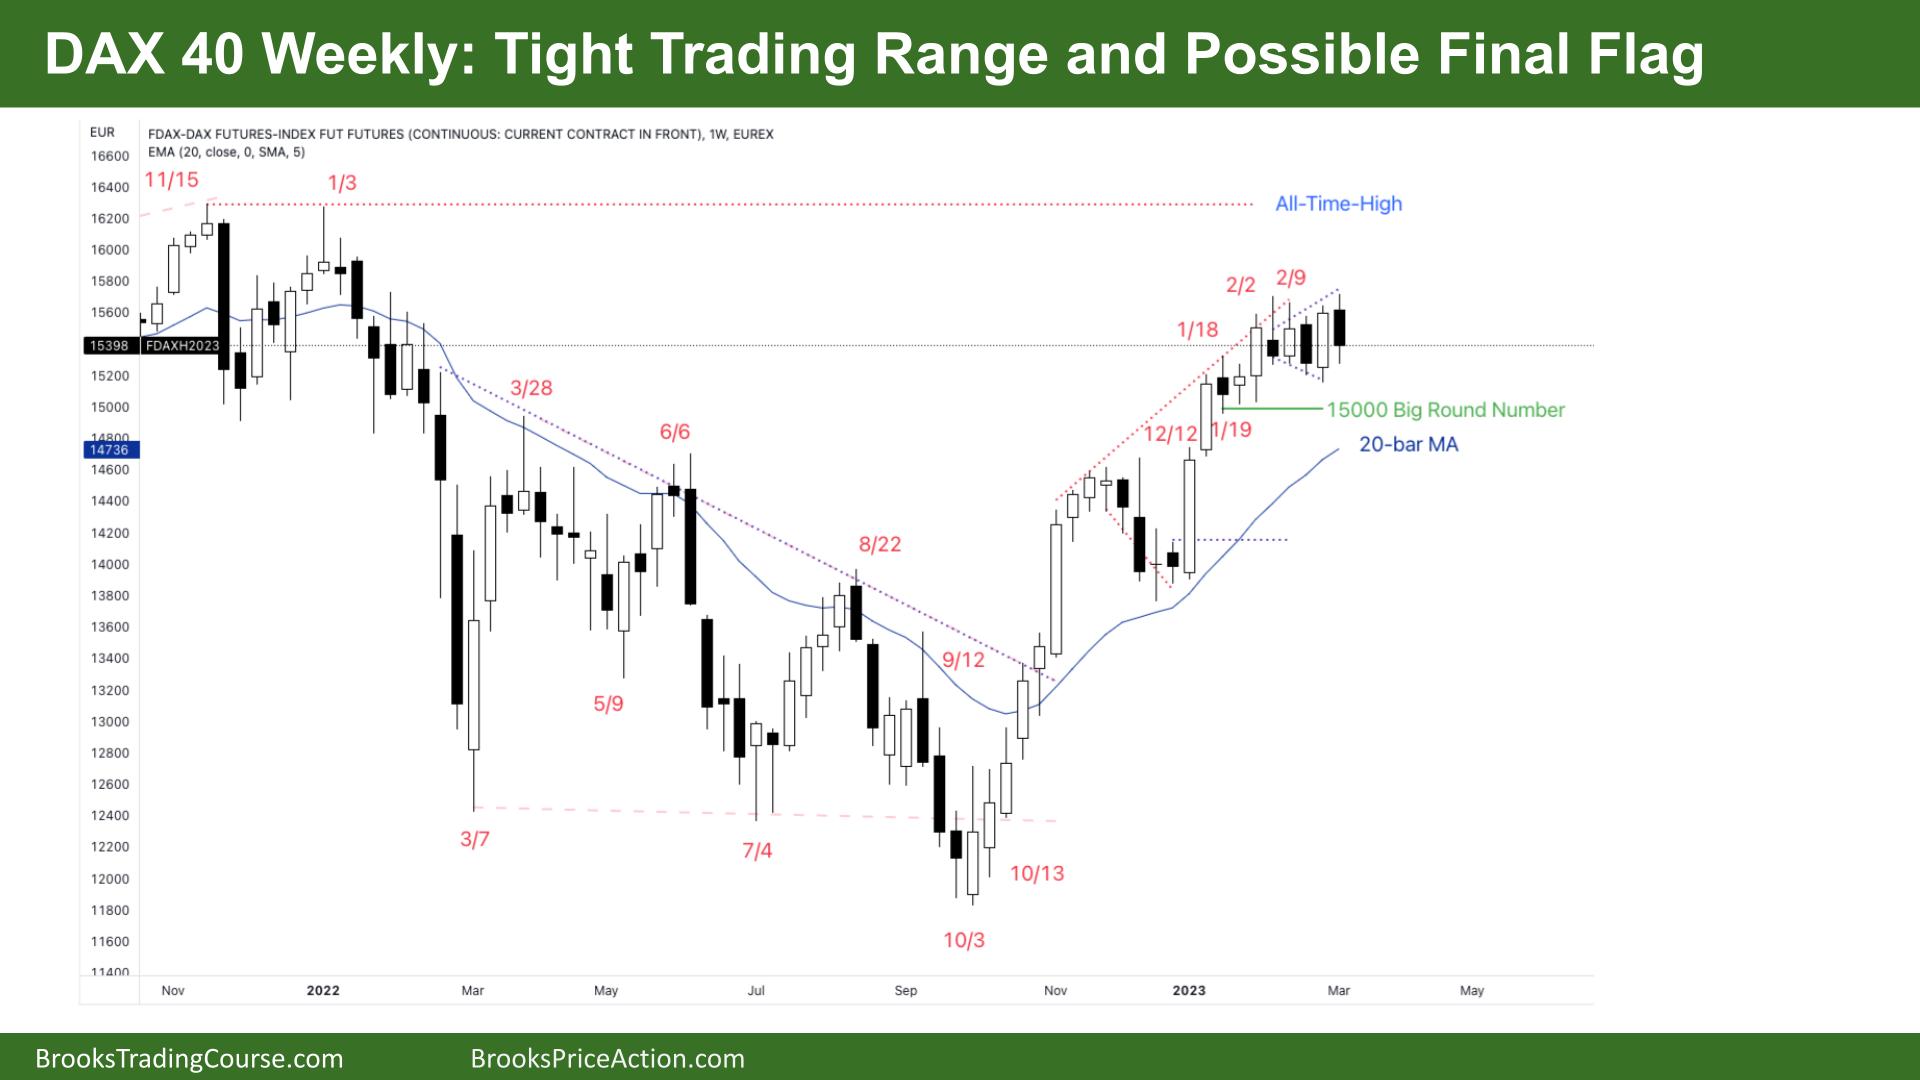 DAX 40 Tight Trading Range and Possible Final Flag